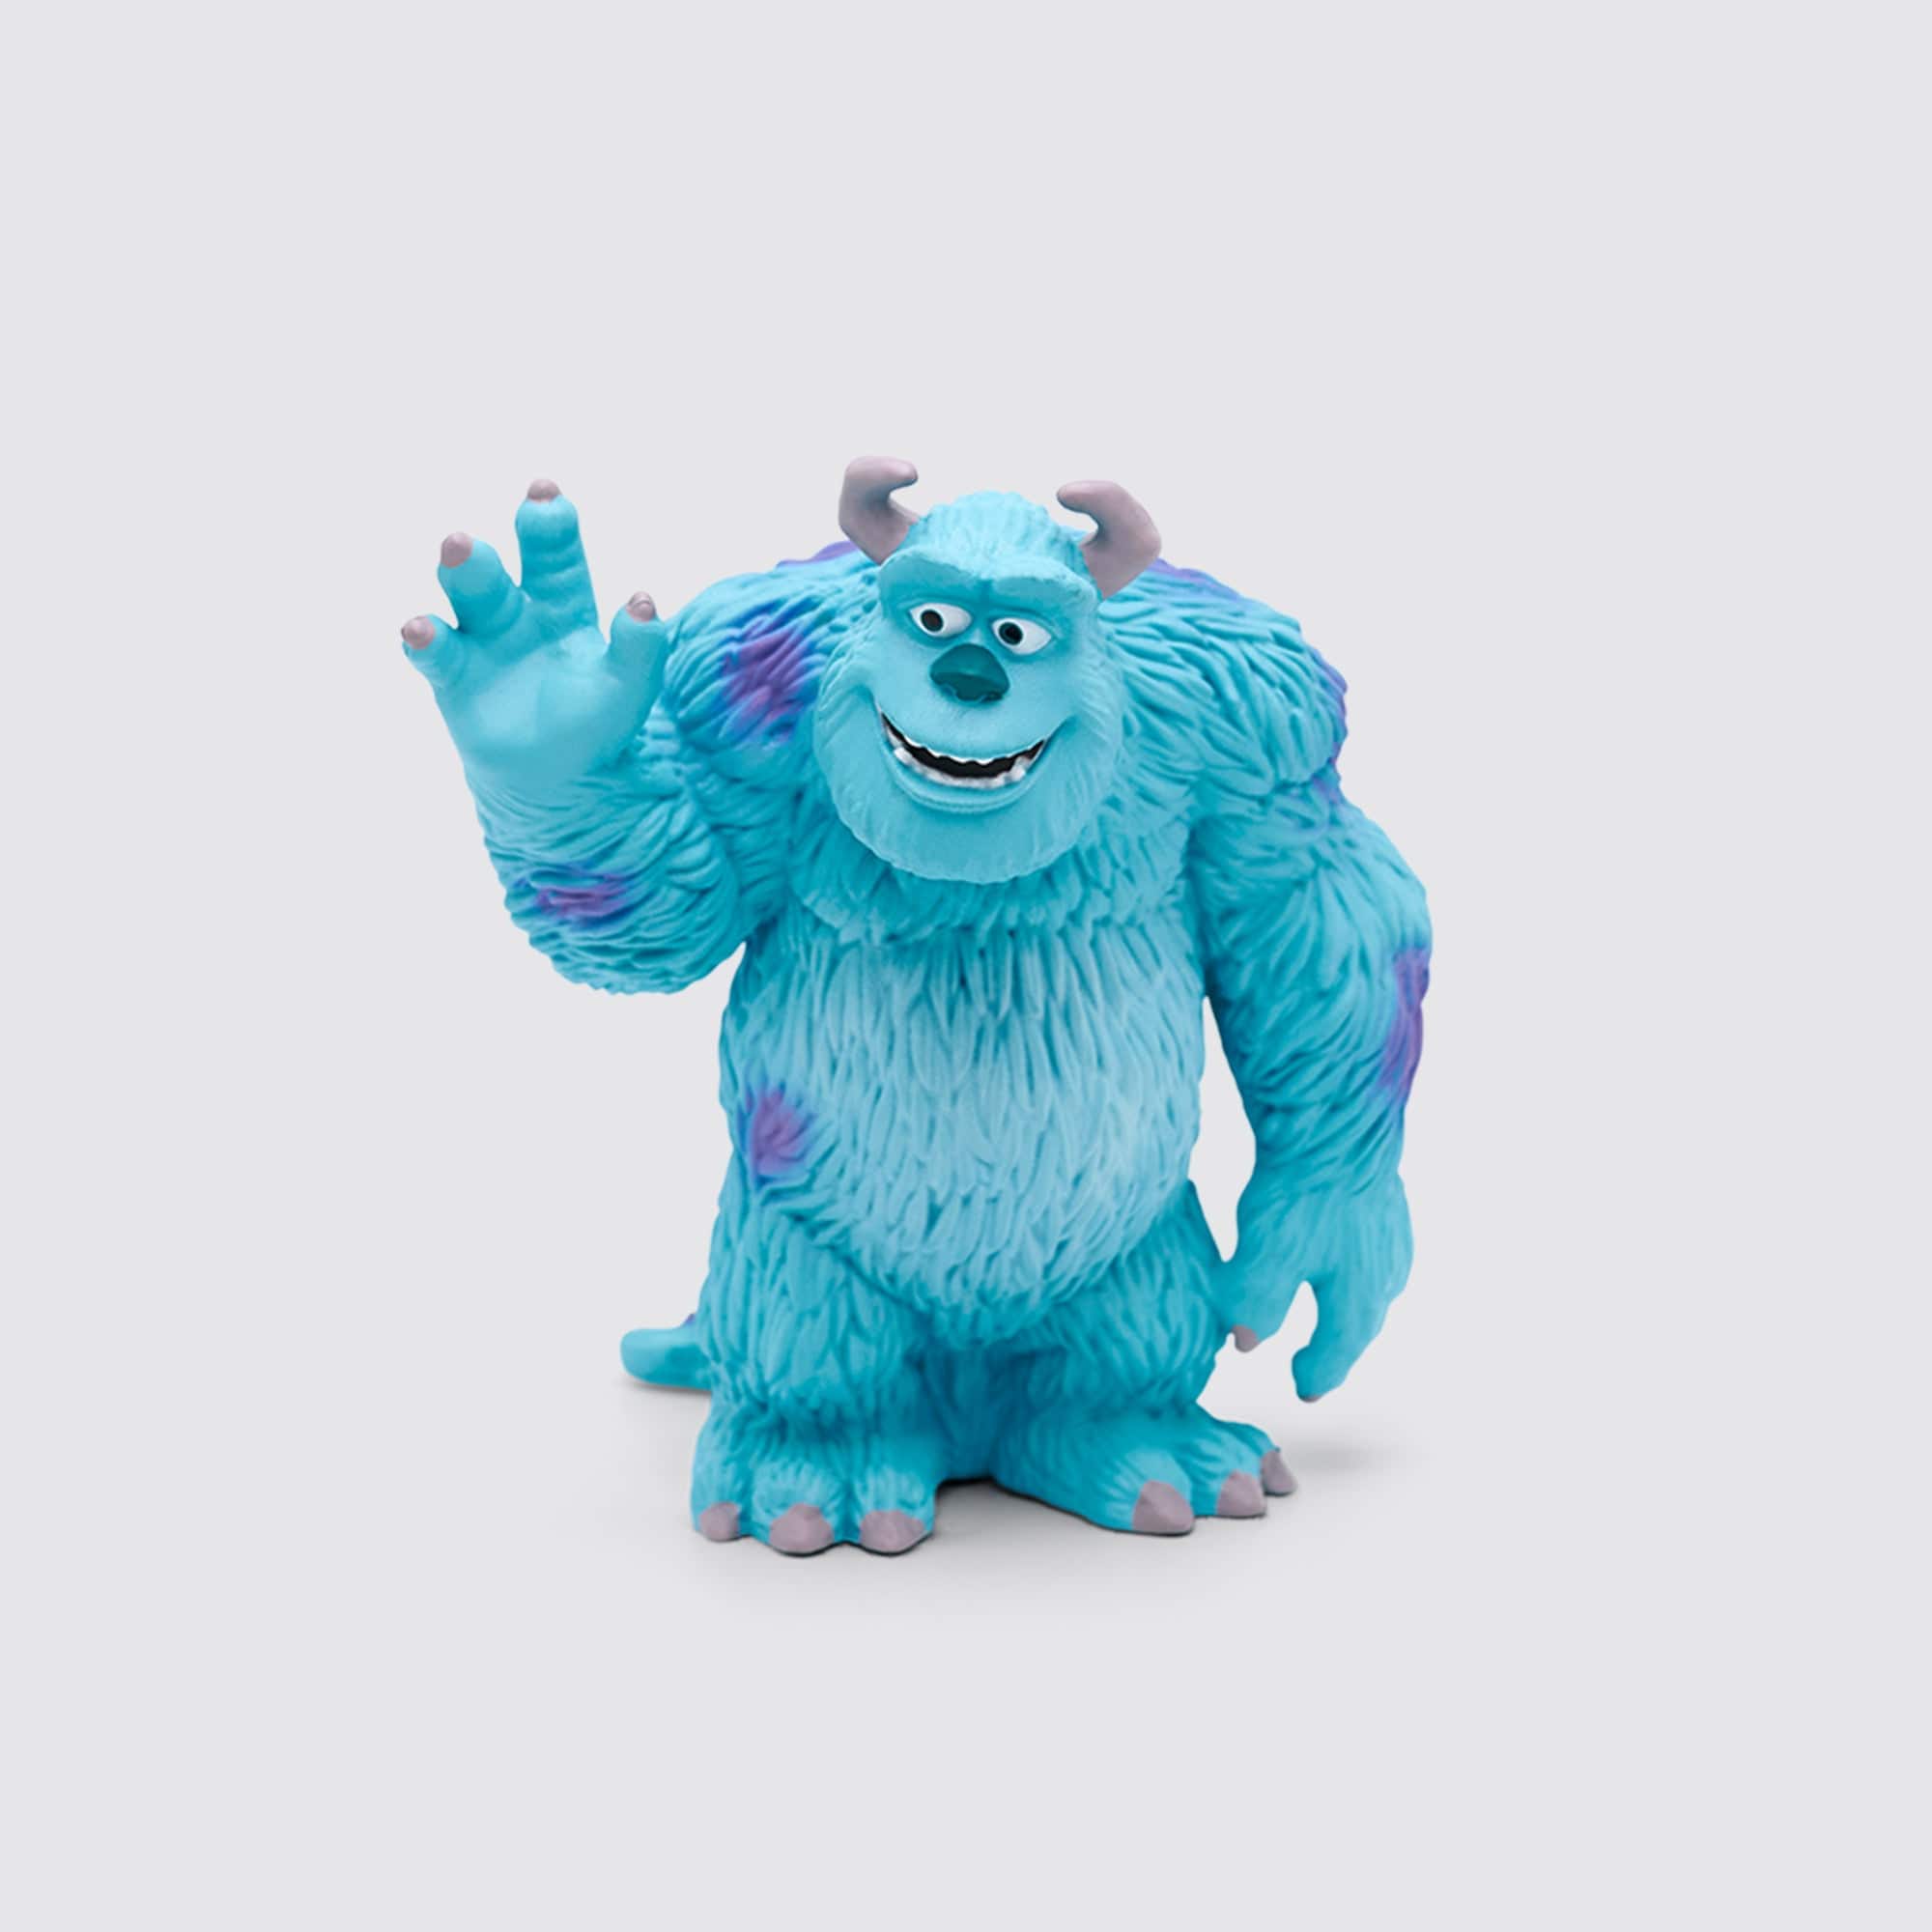 Monsters Inc: See the Voices Behind Your Favorite Characters